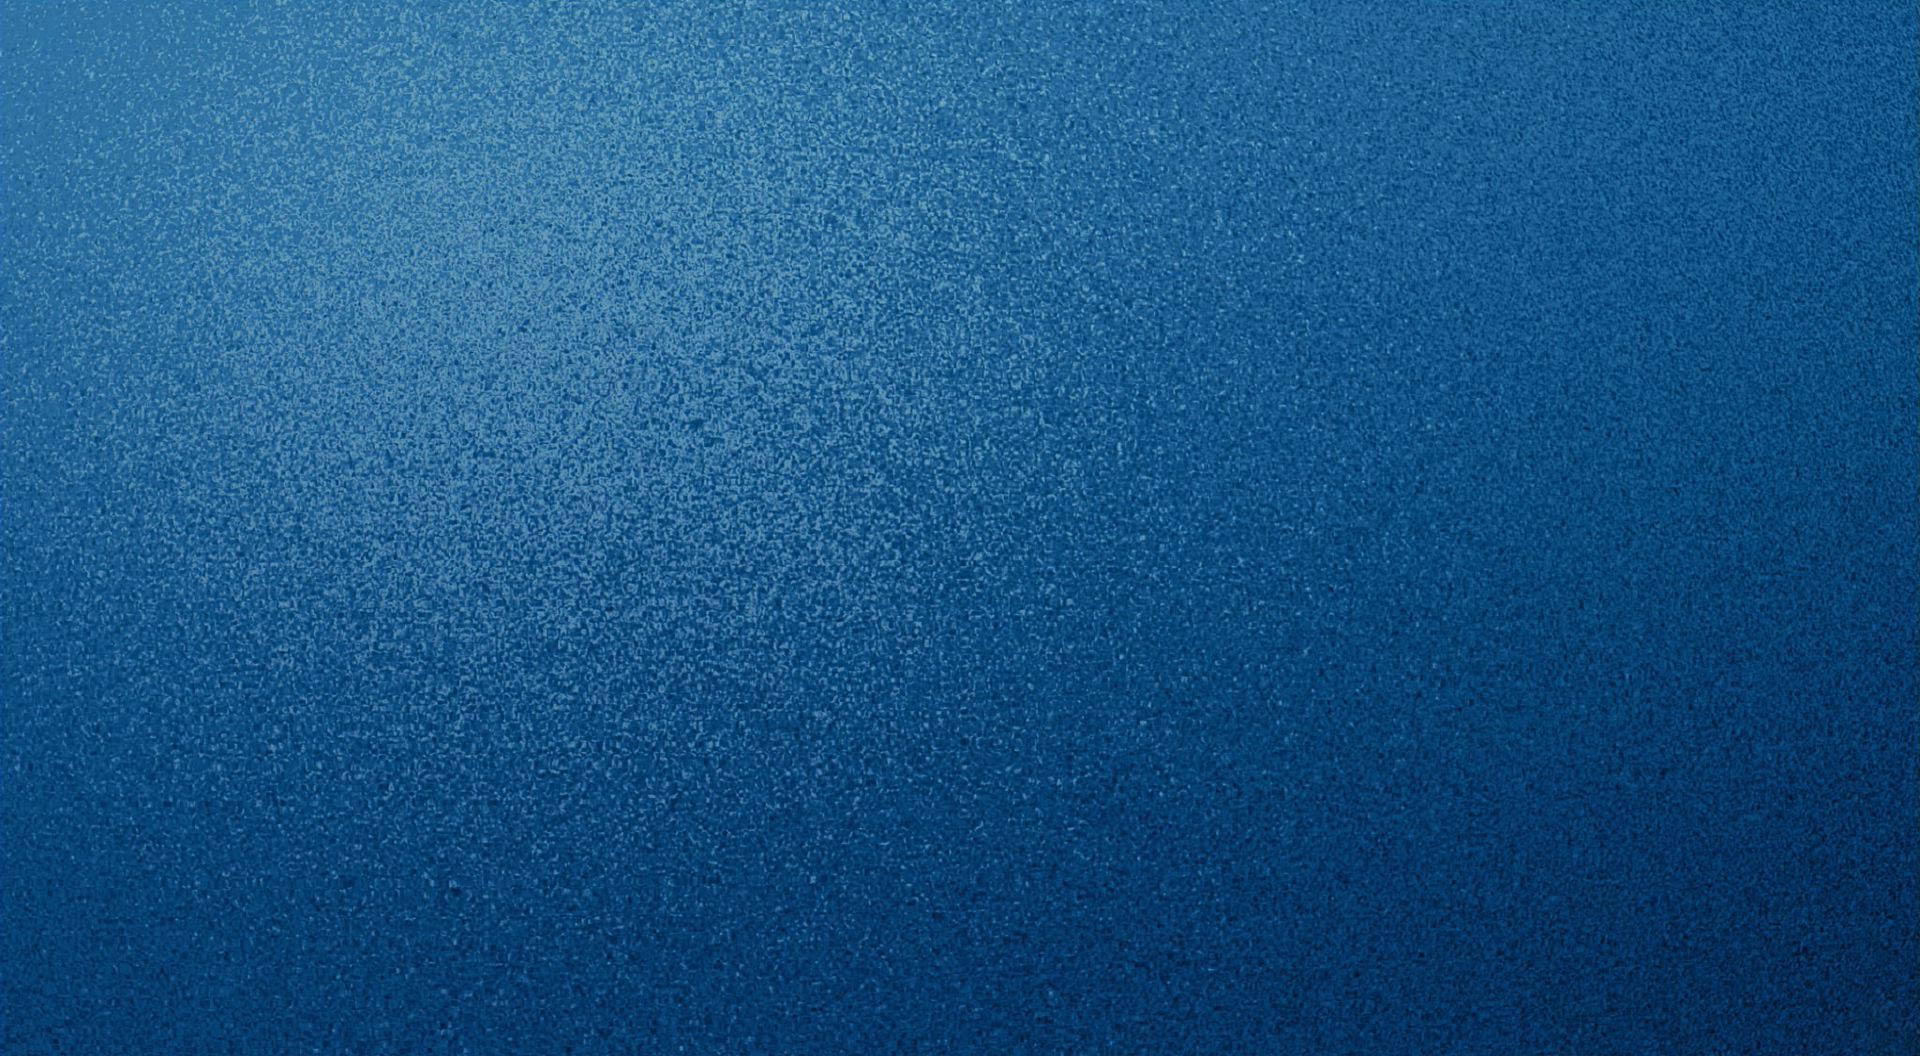 Blue textured speckled desktop background wallpaper for use with Mac